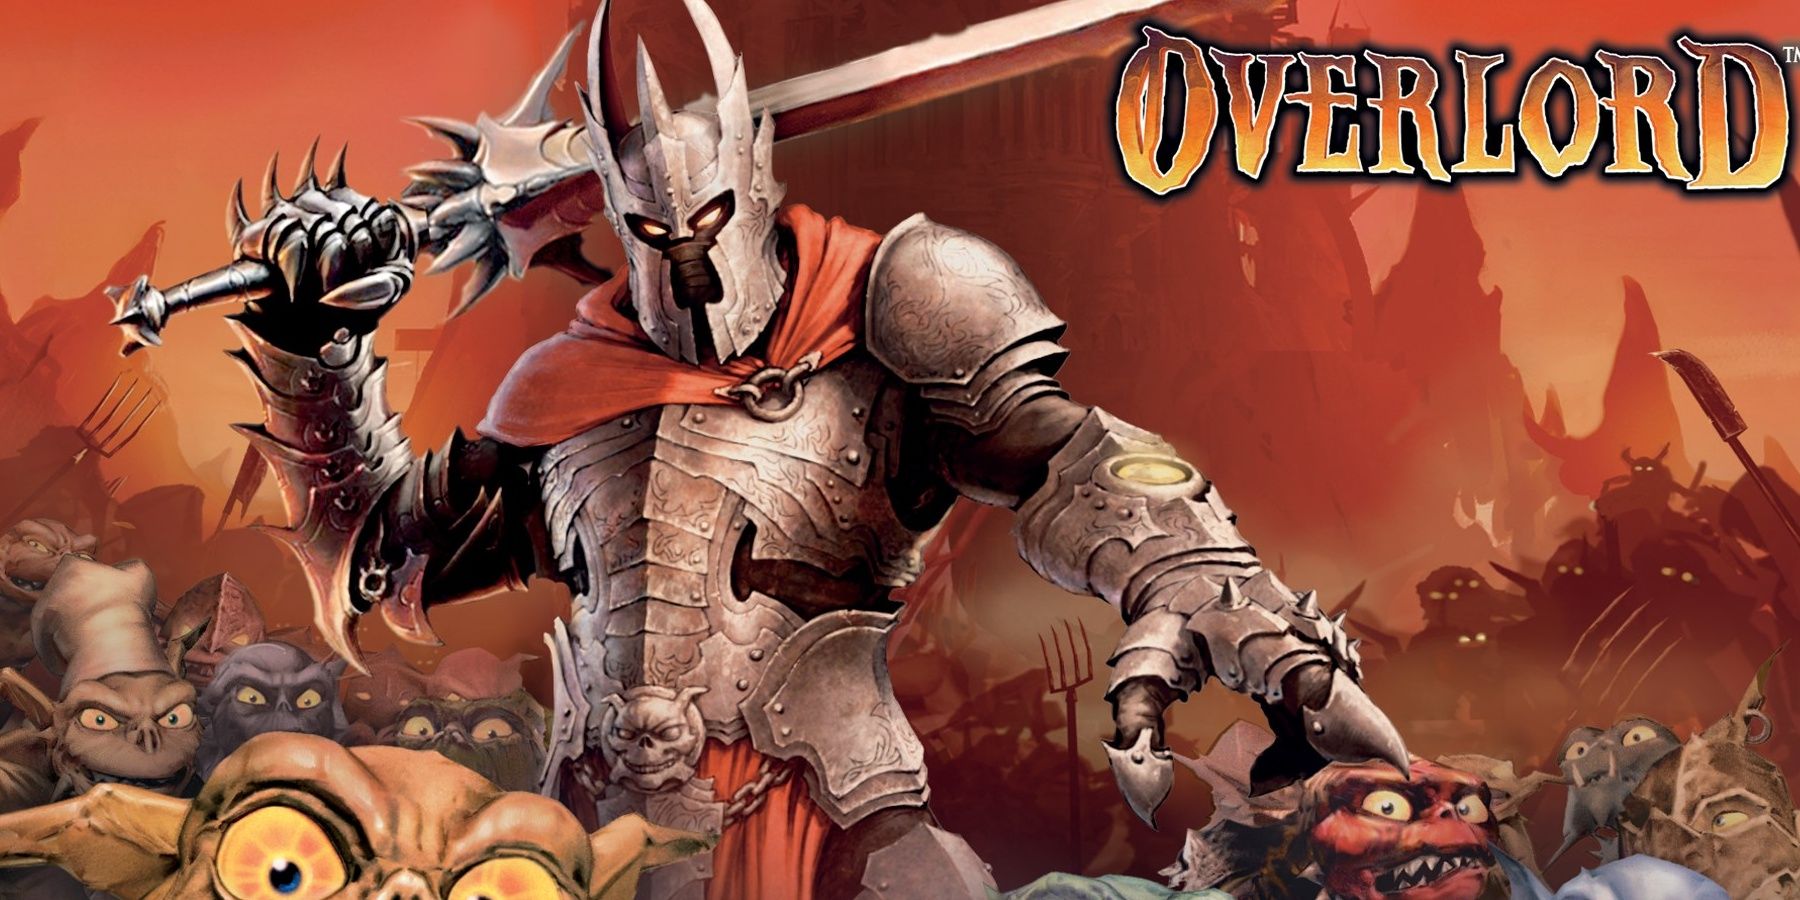 The Overlord posing with his sword while his army of Minions surround him, cover art for Overlord